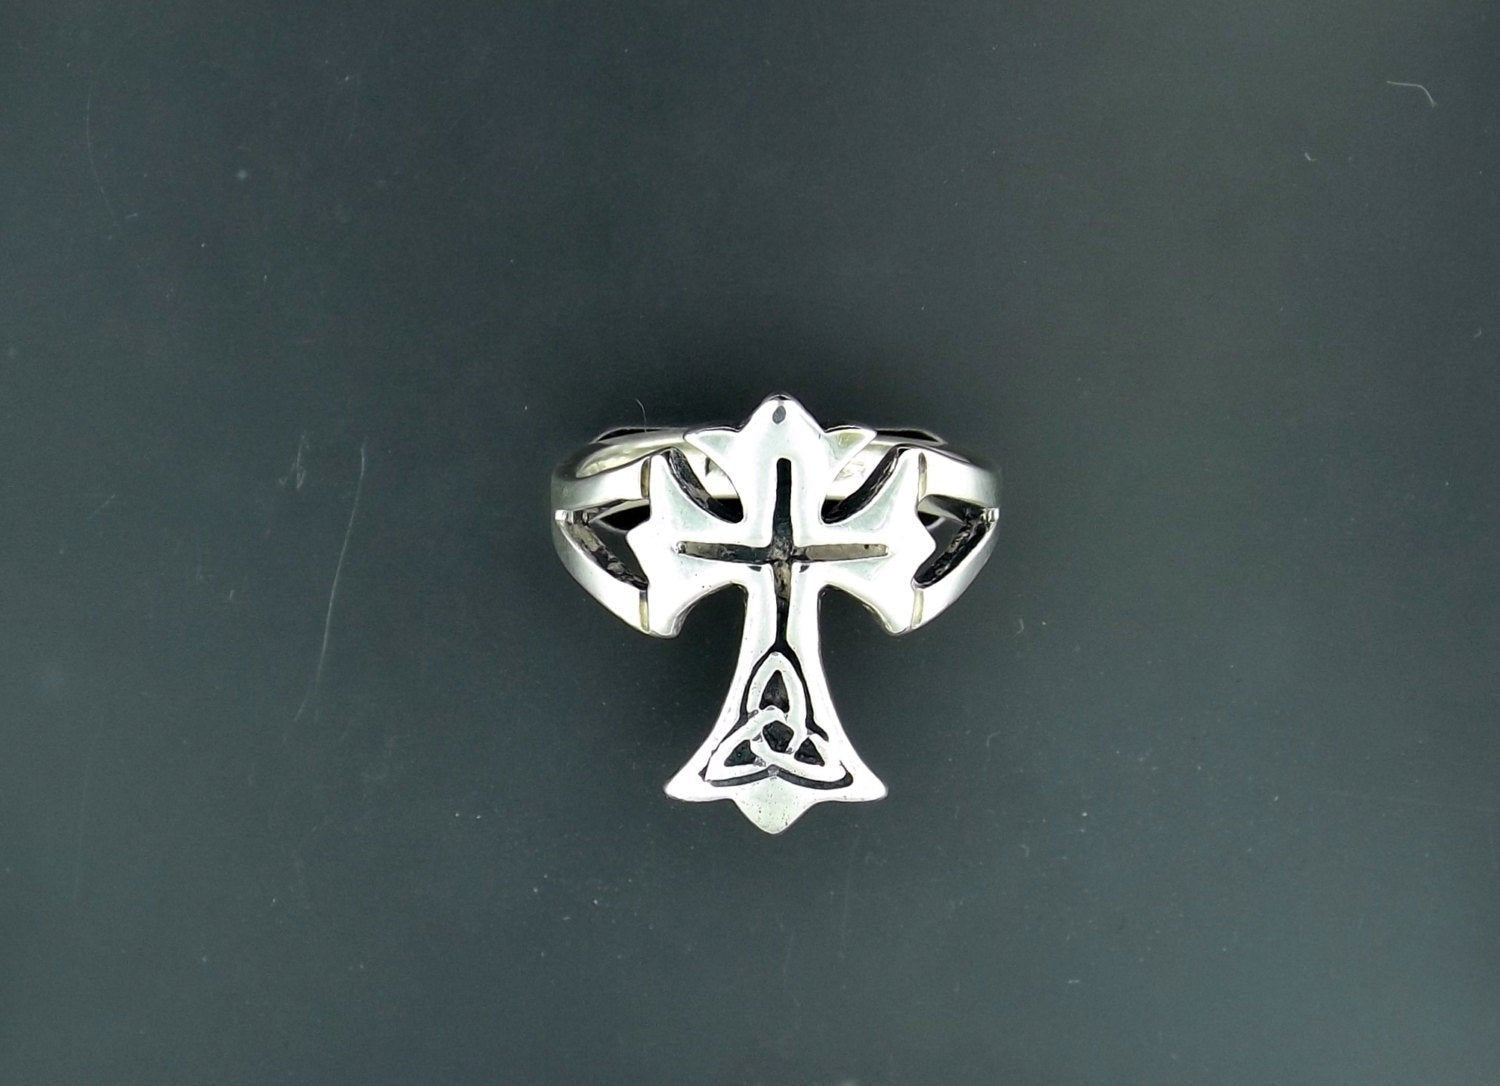 Celtic Cross Ring in Sterling Silver or Antique Bronze, Silver Triquetra Ring, Bronze Triquetra Ring, Sterling Silver Cross Ring, Antique Bronze Cross Ring, Celtic Cross Ring, Irish Cross Ring, Celtic Cross Jewelry, Celtic Cross Jewellery, Bronze Trinity Knot Ring, Silver Trinity Knot Ring, Trinity Knot Ring, Silver Irish Ring, Bronze Irish Ring, Irish Celtic Cross, Irish Celtic Ring